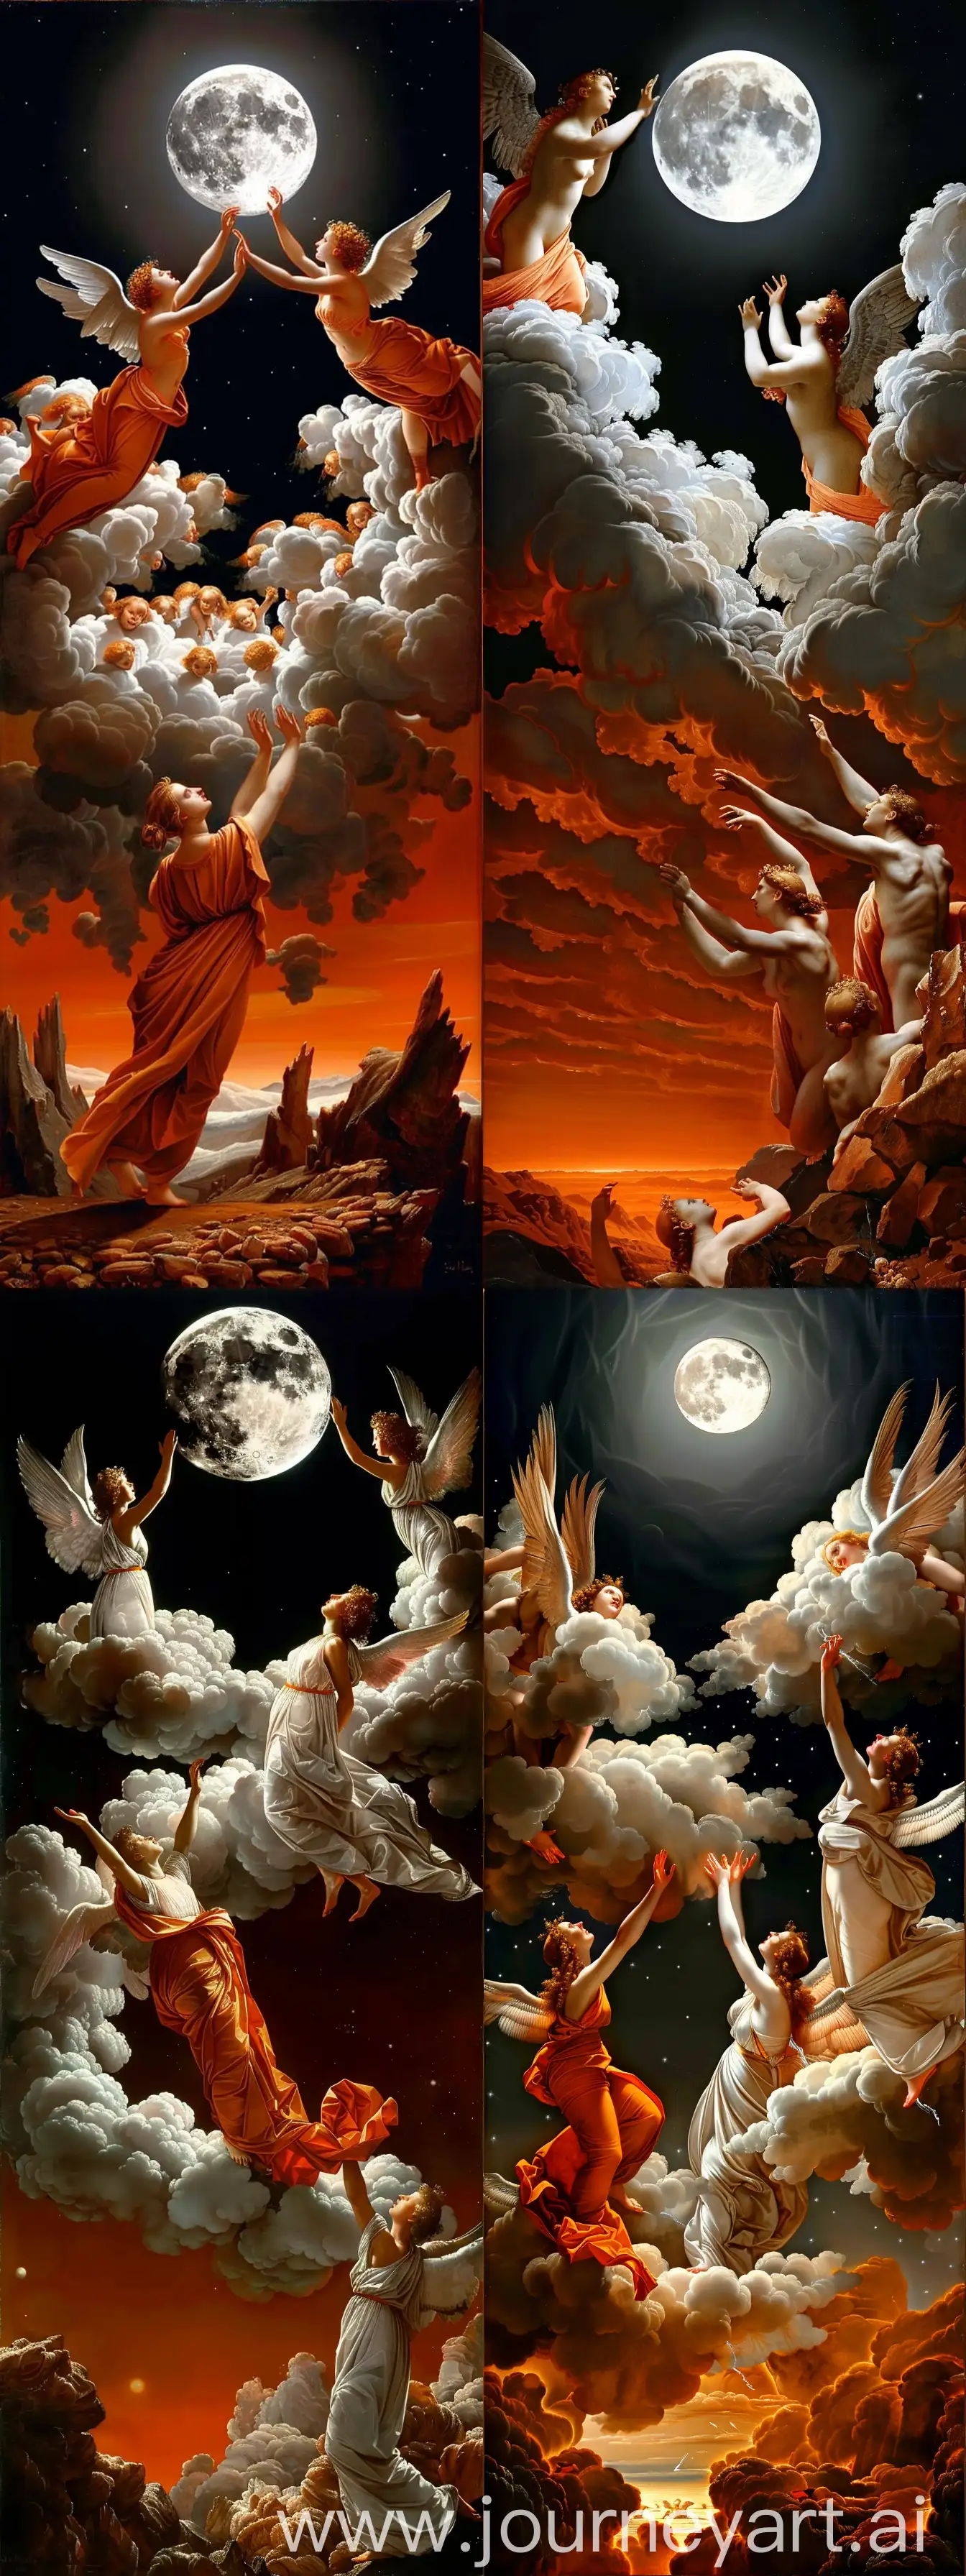 A Renaissance painting of the human world reaching up to the night sky with three angels in the clouds and the bright moon in the background --sref https://i.pinimg.com/originals/4b/6f/8f/4b6f8f57b3c028fae7c645ecd4ae16f0.jpg --v 6 --ar 6:16  --style raw